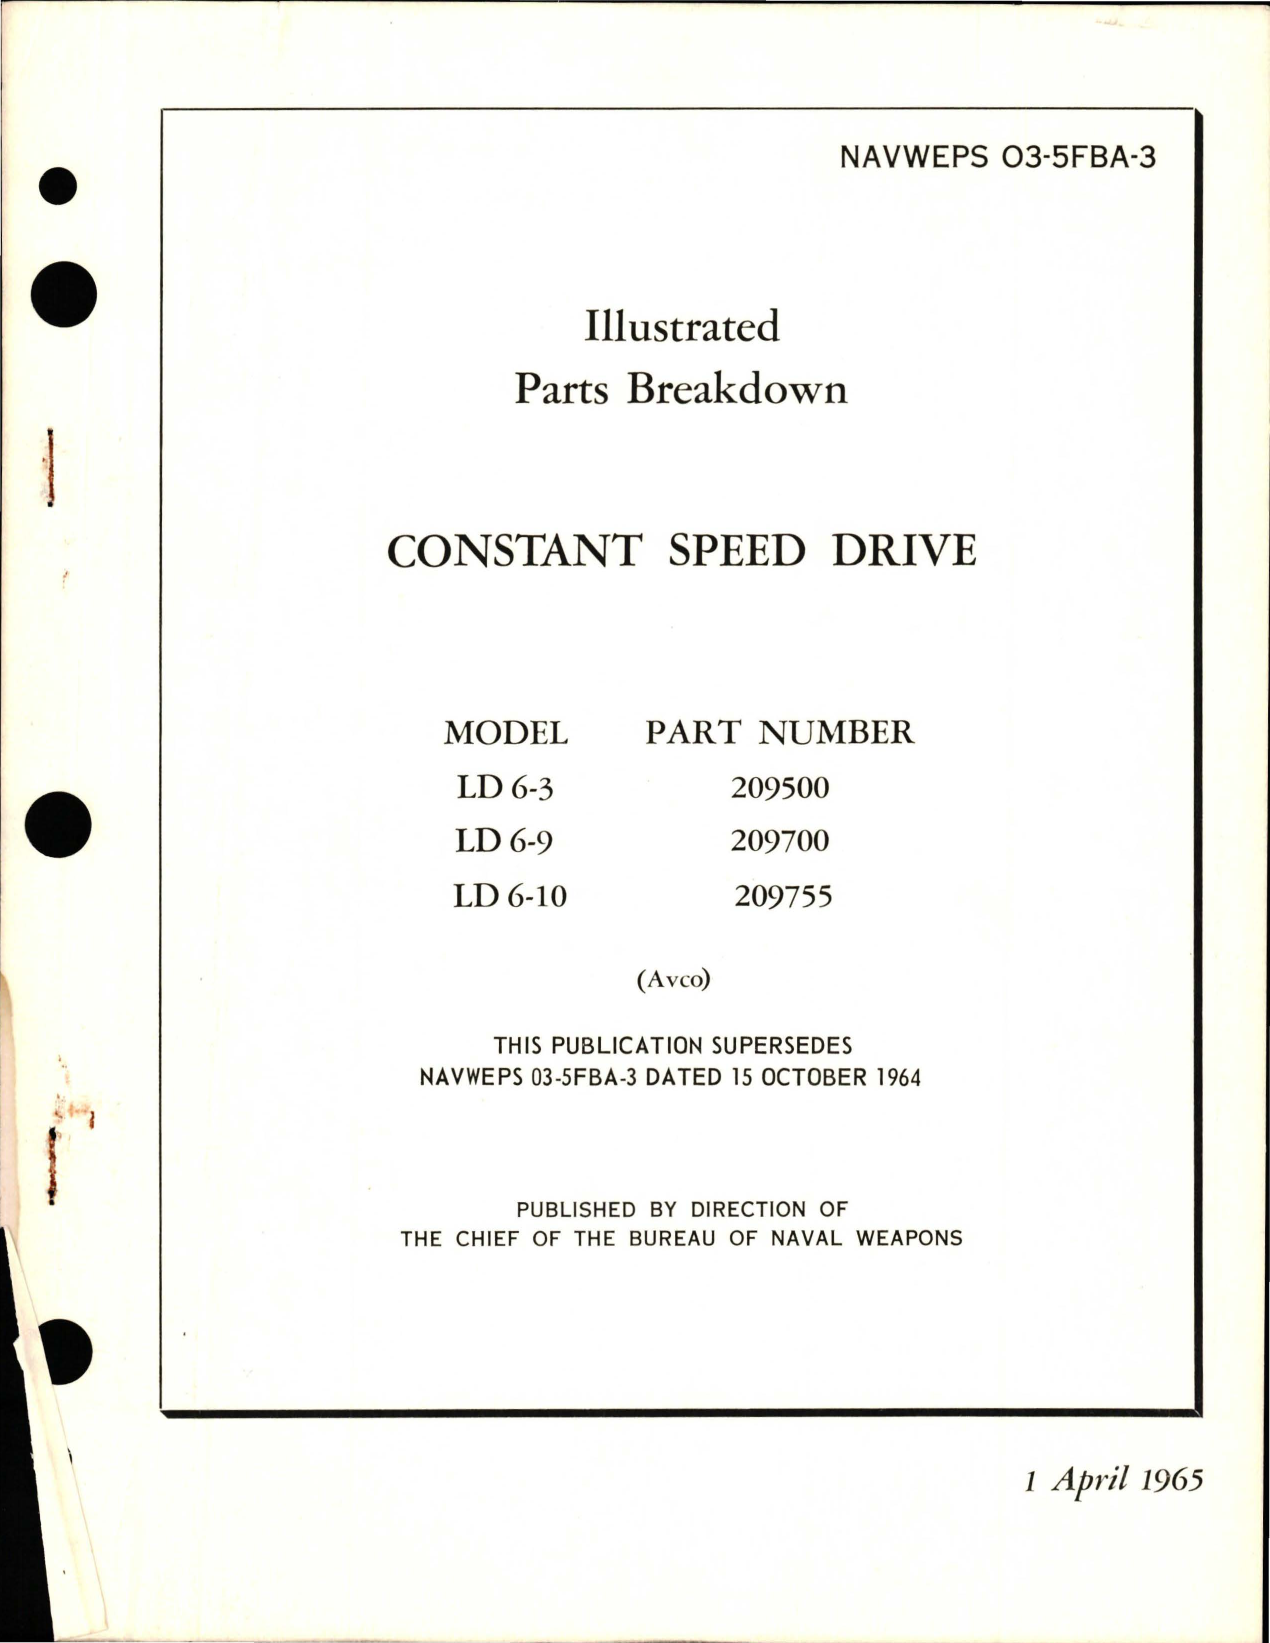 Sample page 1 from AirCorps Library document: Illustrated Parts Breakdown for Constant Speed Drive - Models LD 6-3, LD 6-9, LD 6-10 - Parts 209500, 209700, 209755